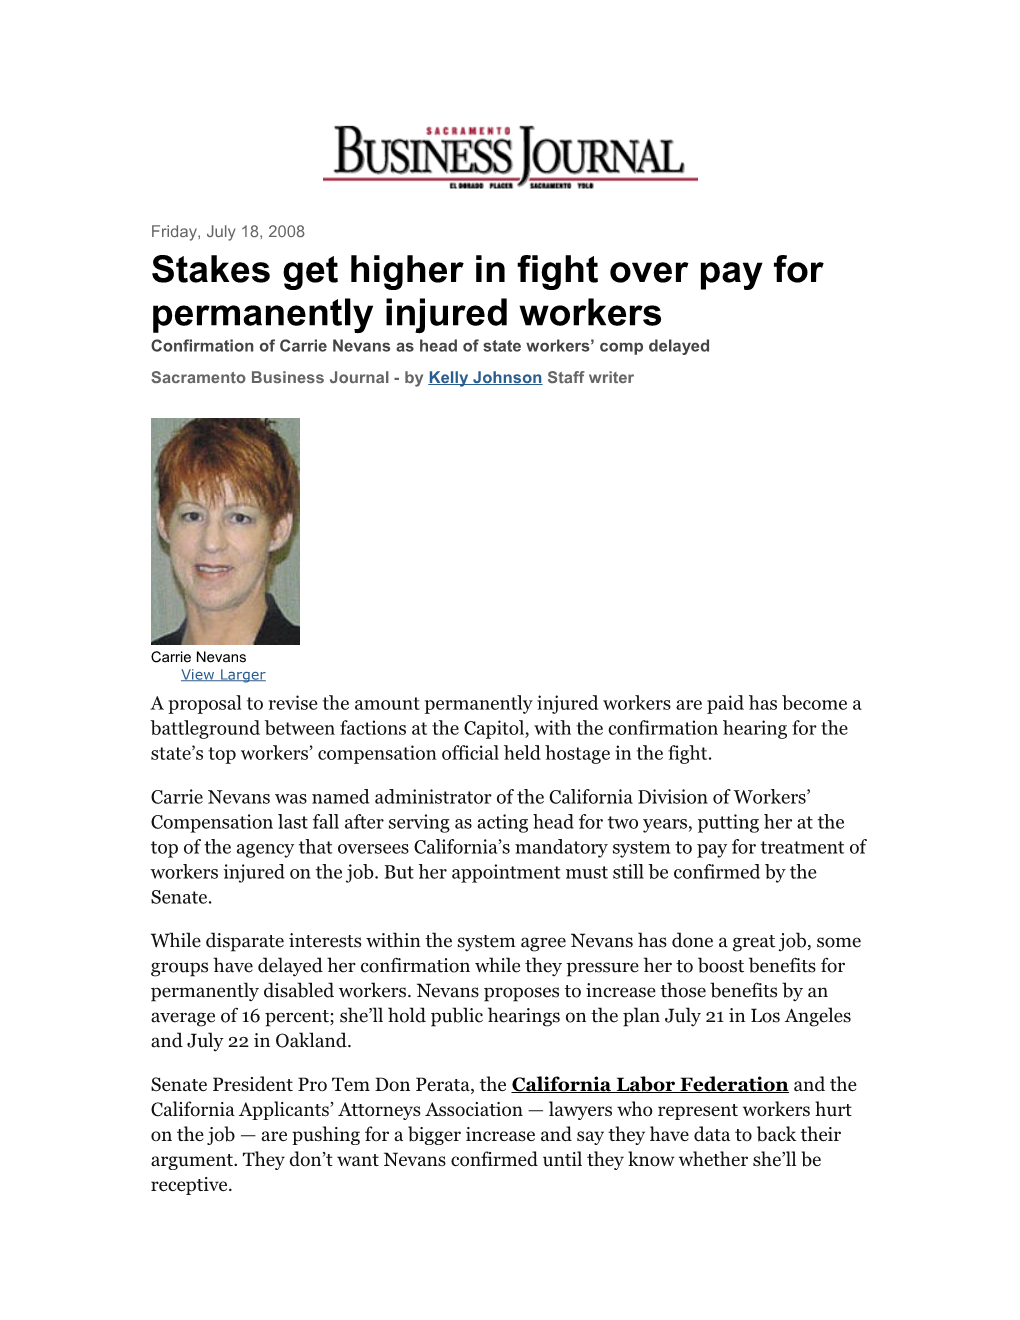 Stakes Get Higher in Fight Over Pay for Permanently Injured Workers